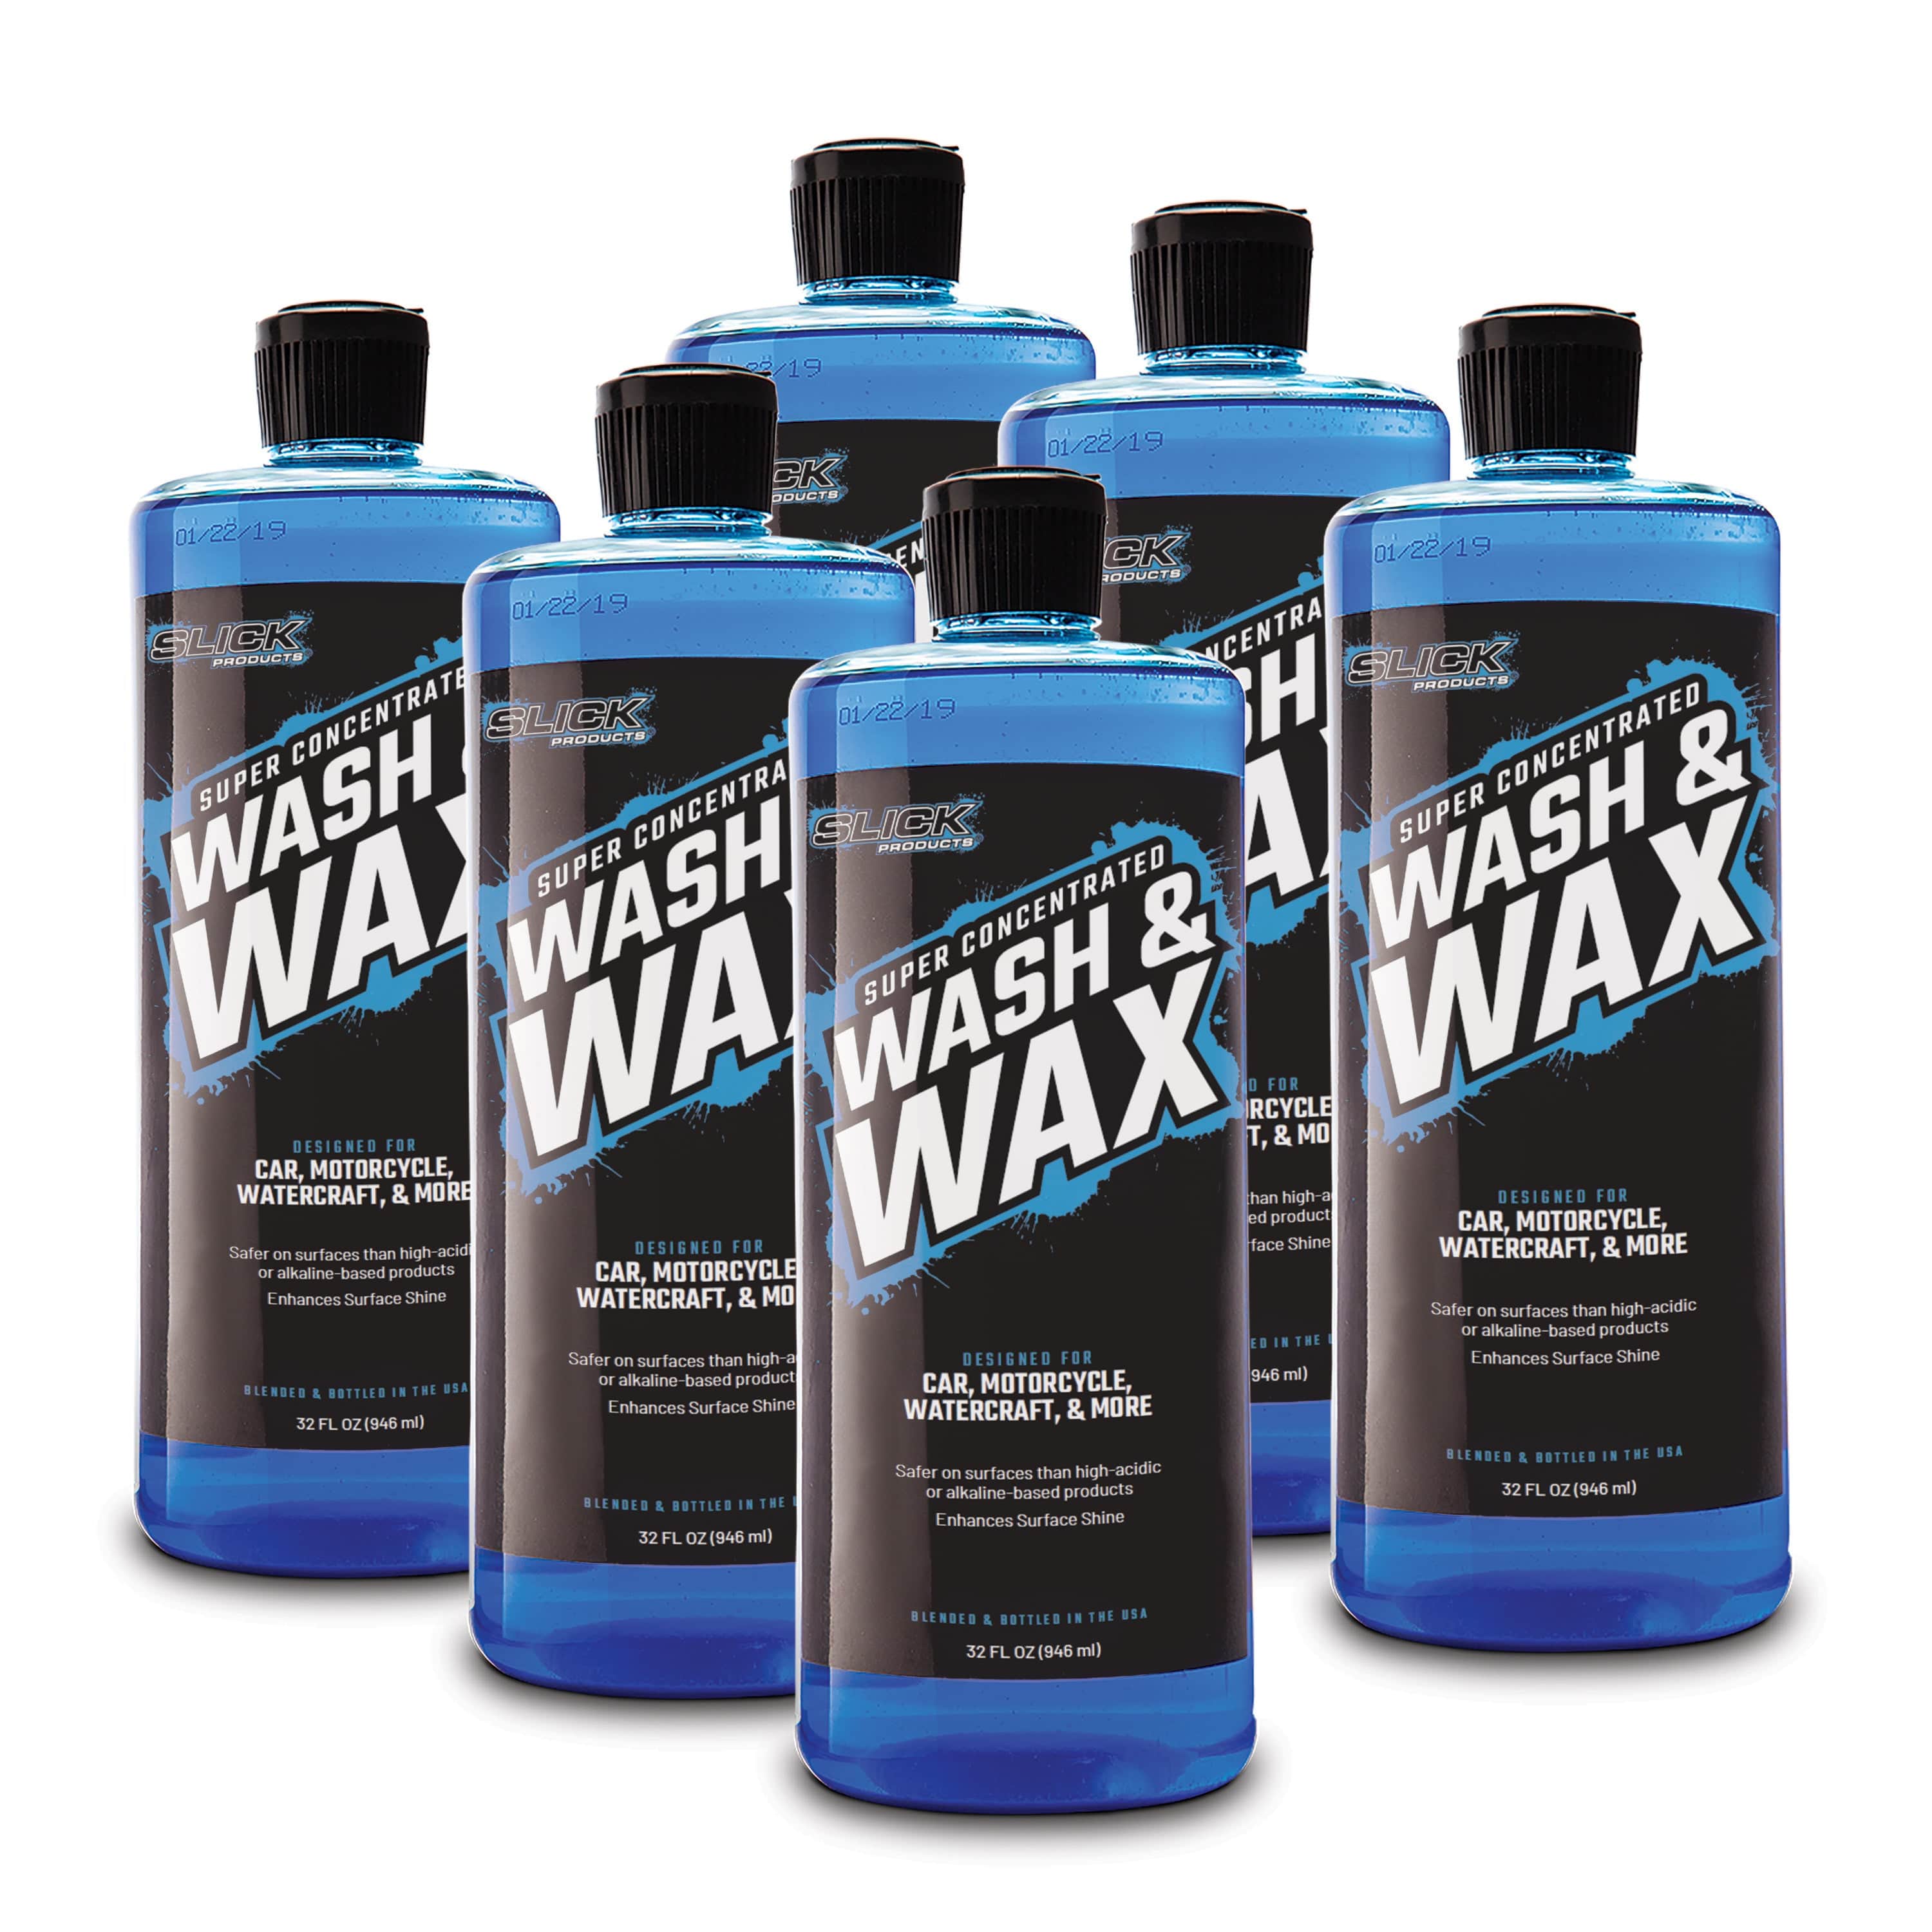 Slick Products Off-Road Wash Kit - Keefer, Inc. Tested